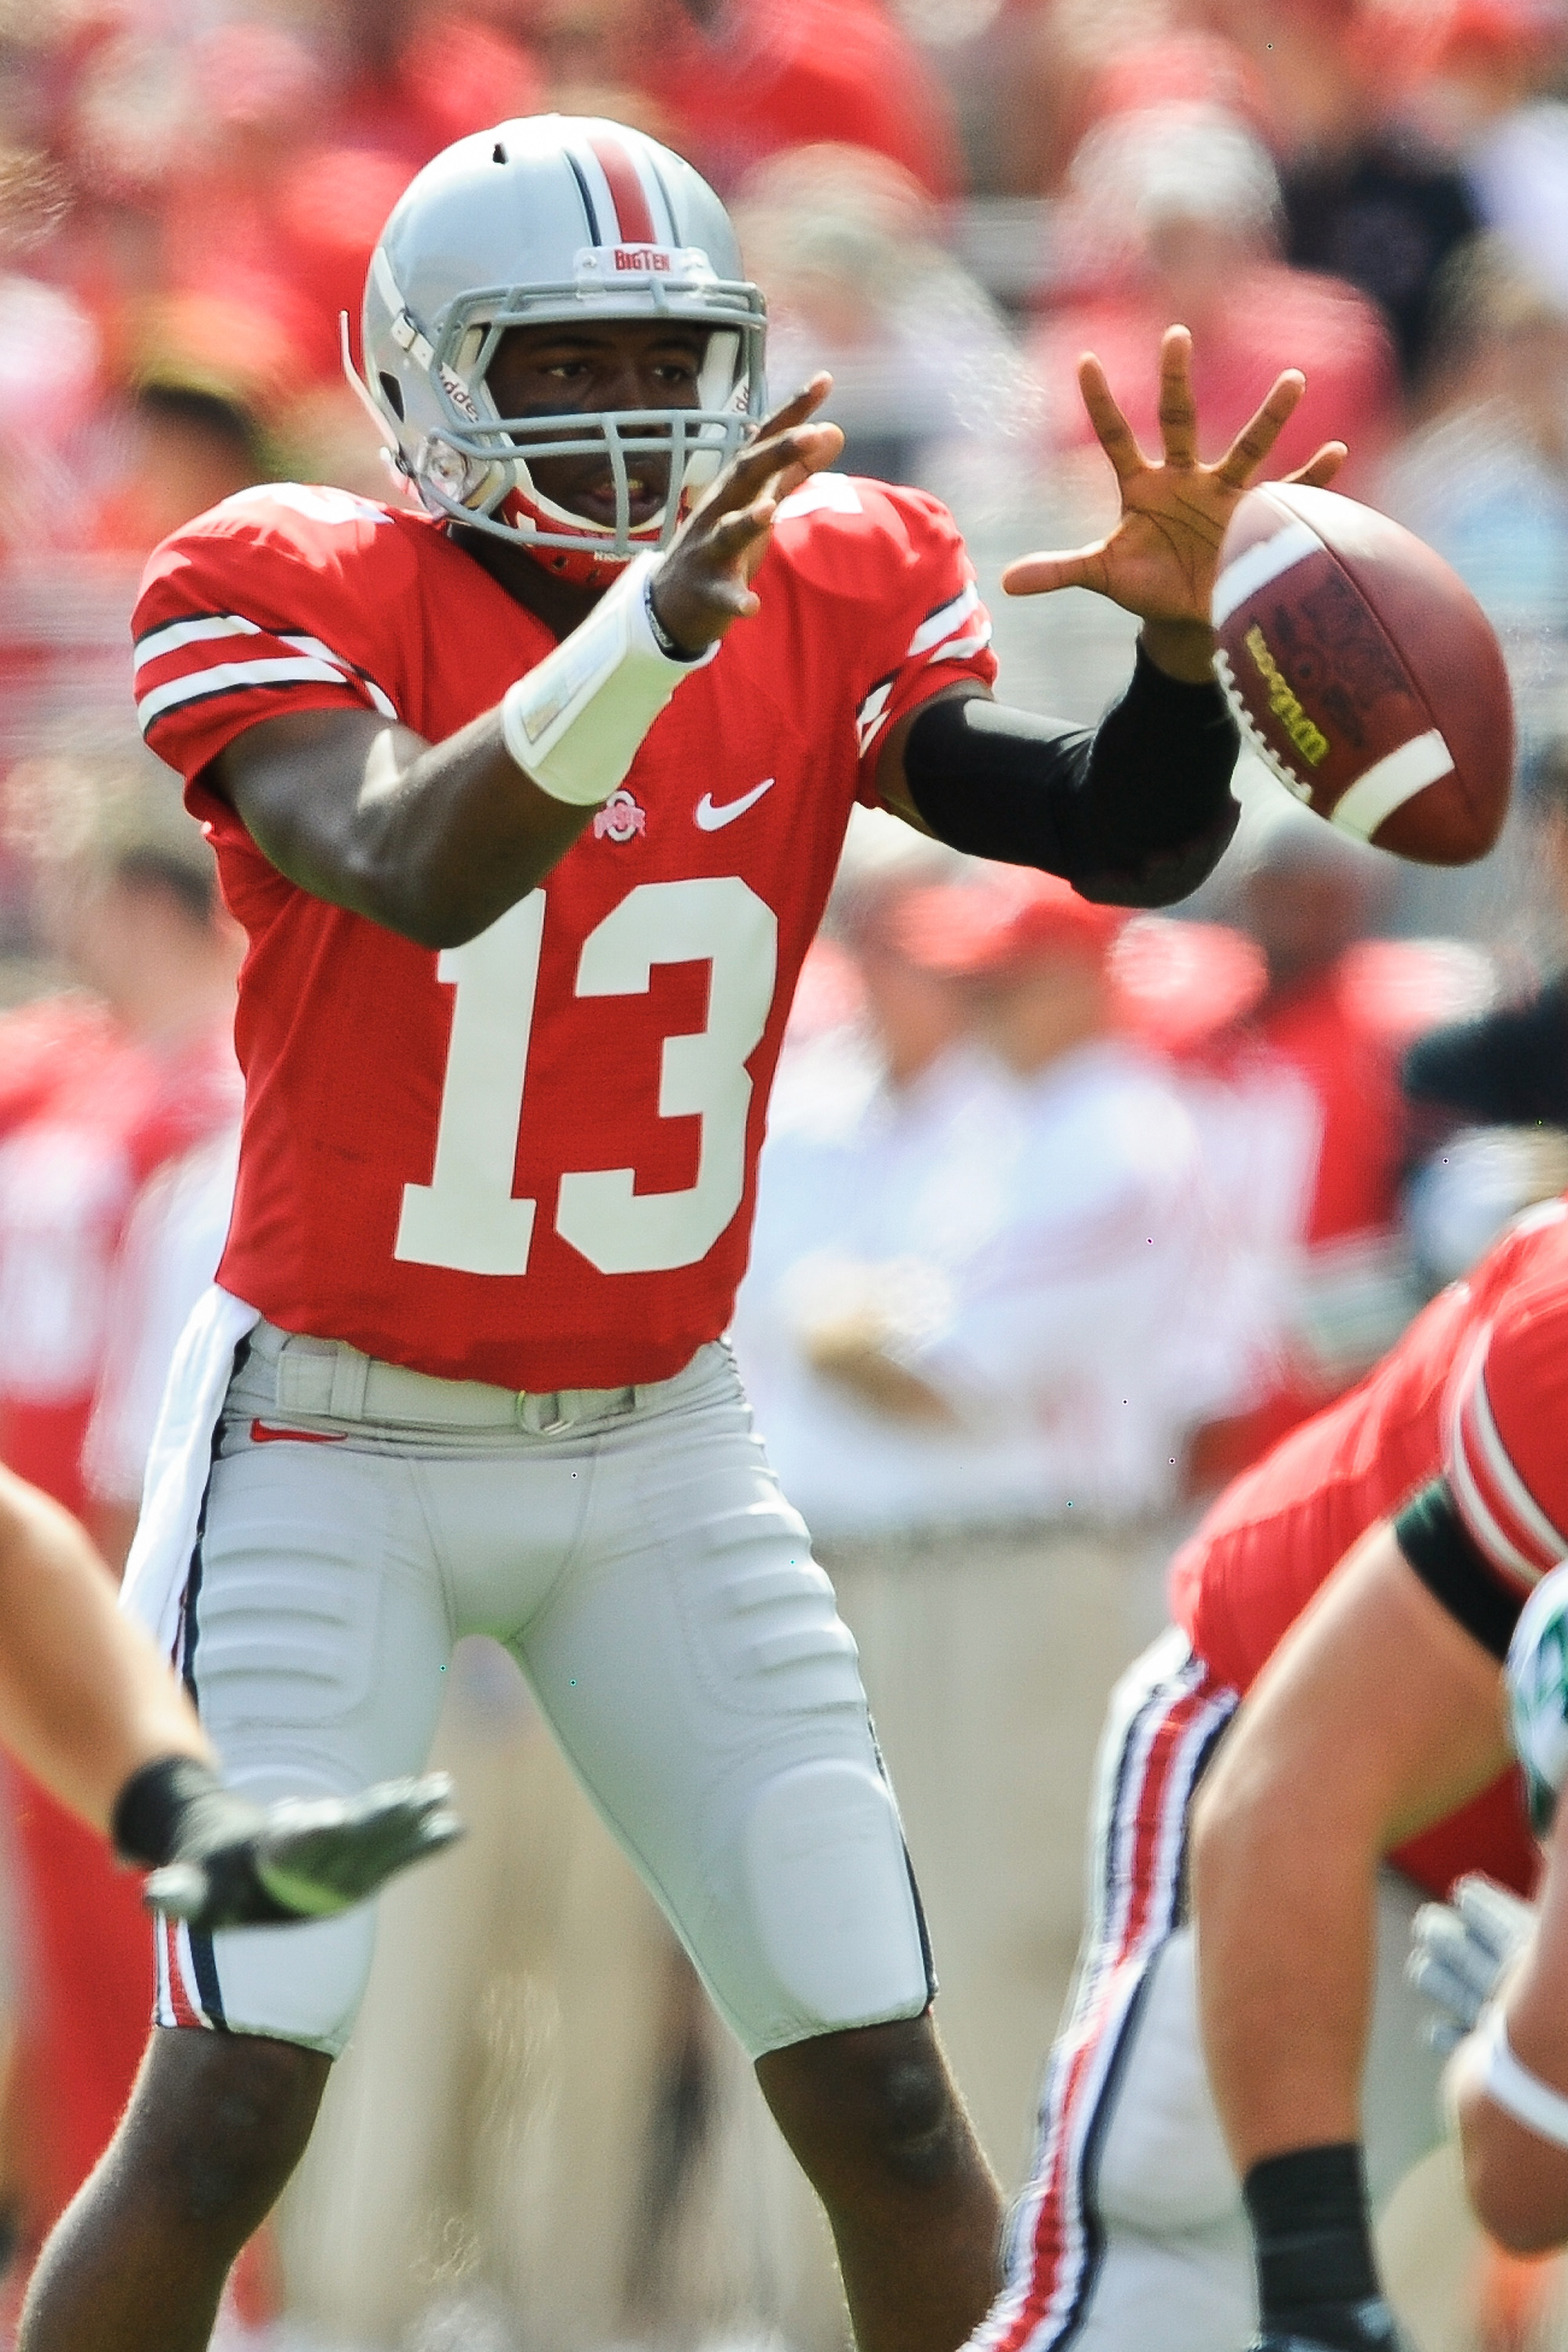 COLUMBUS, OH - SEPTEMBER 18:  Quarterback Ken Guiton #13 of the Ohio State Buckeyes takes the snap against the Ohio Bobcats at Ohio Stadium on September 18, 2010 in Columbus, Ohio.  (Photo by Jamie Sabau/Getty Images)